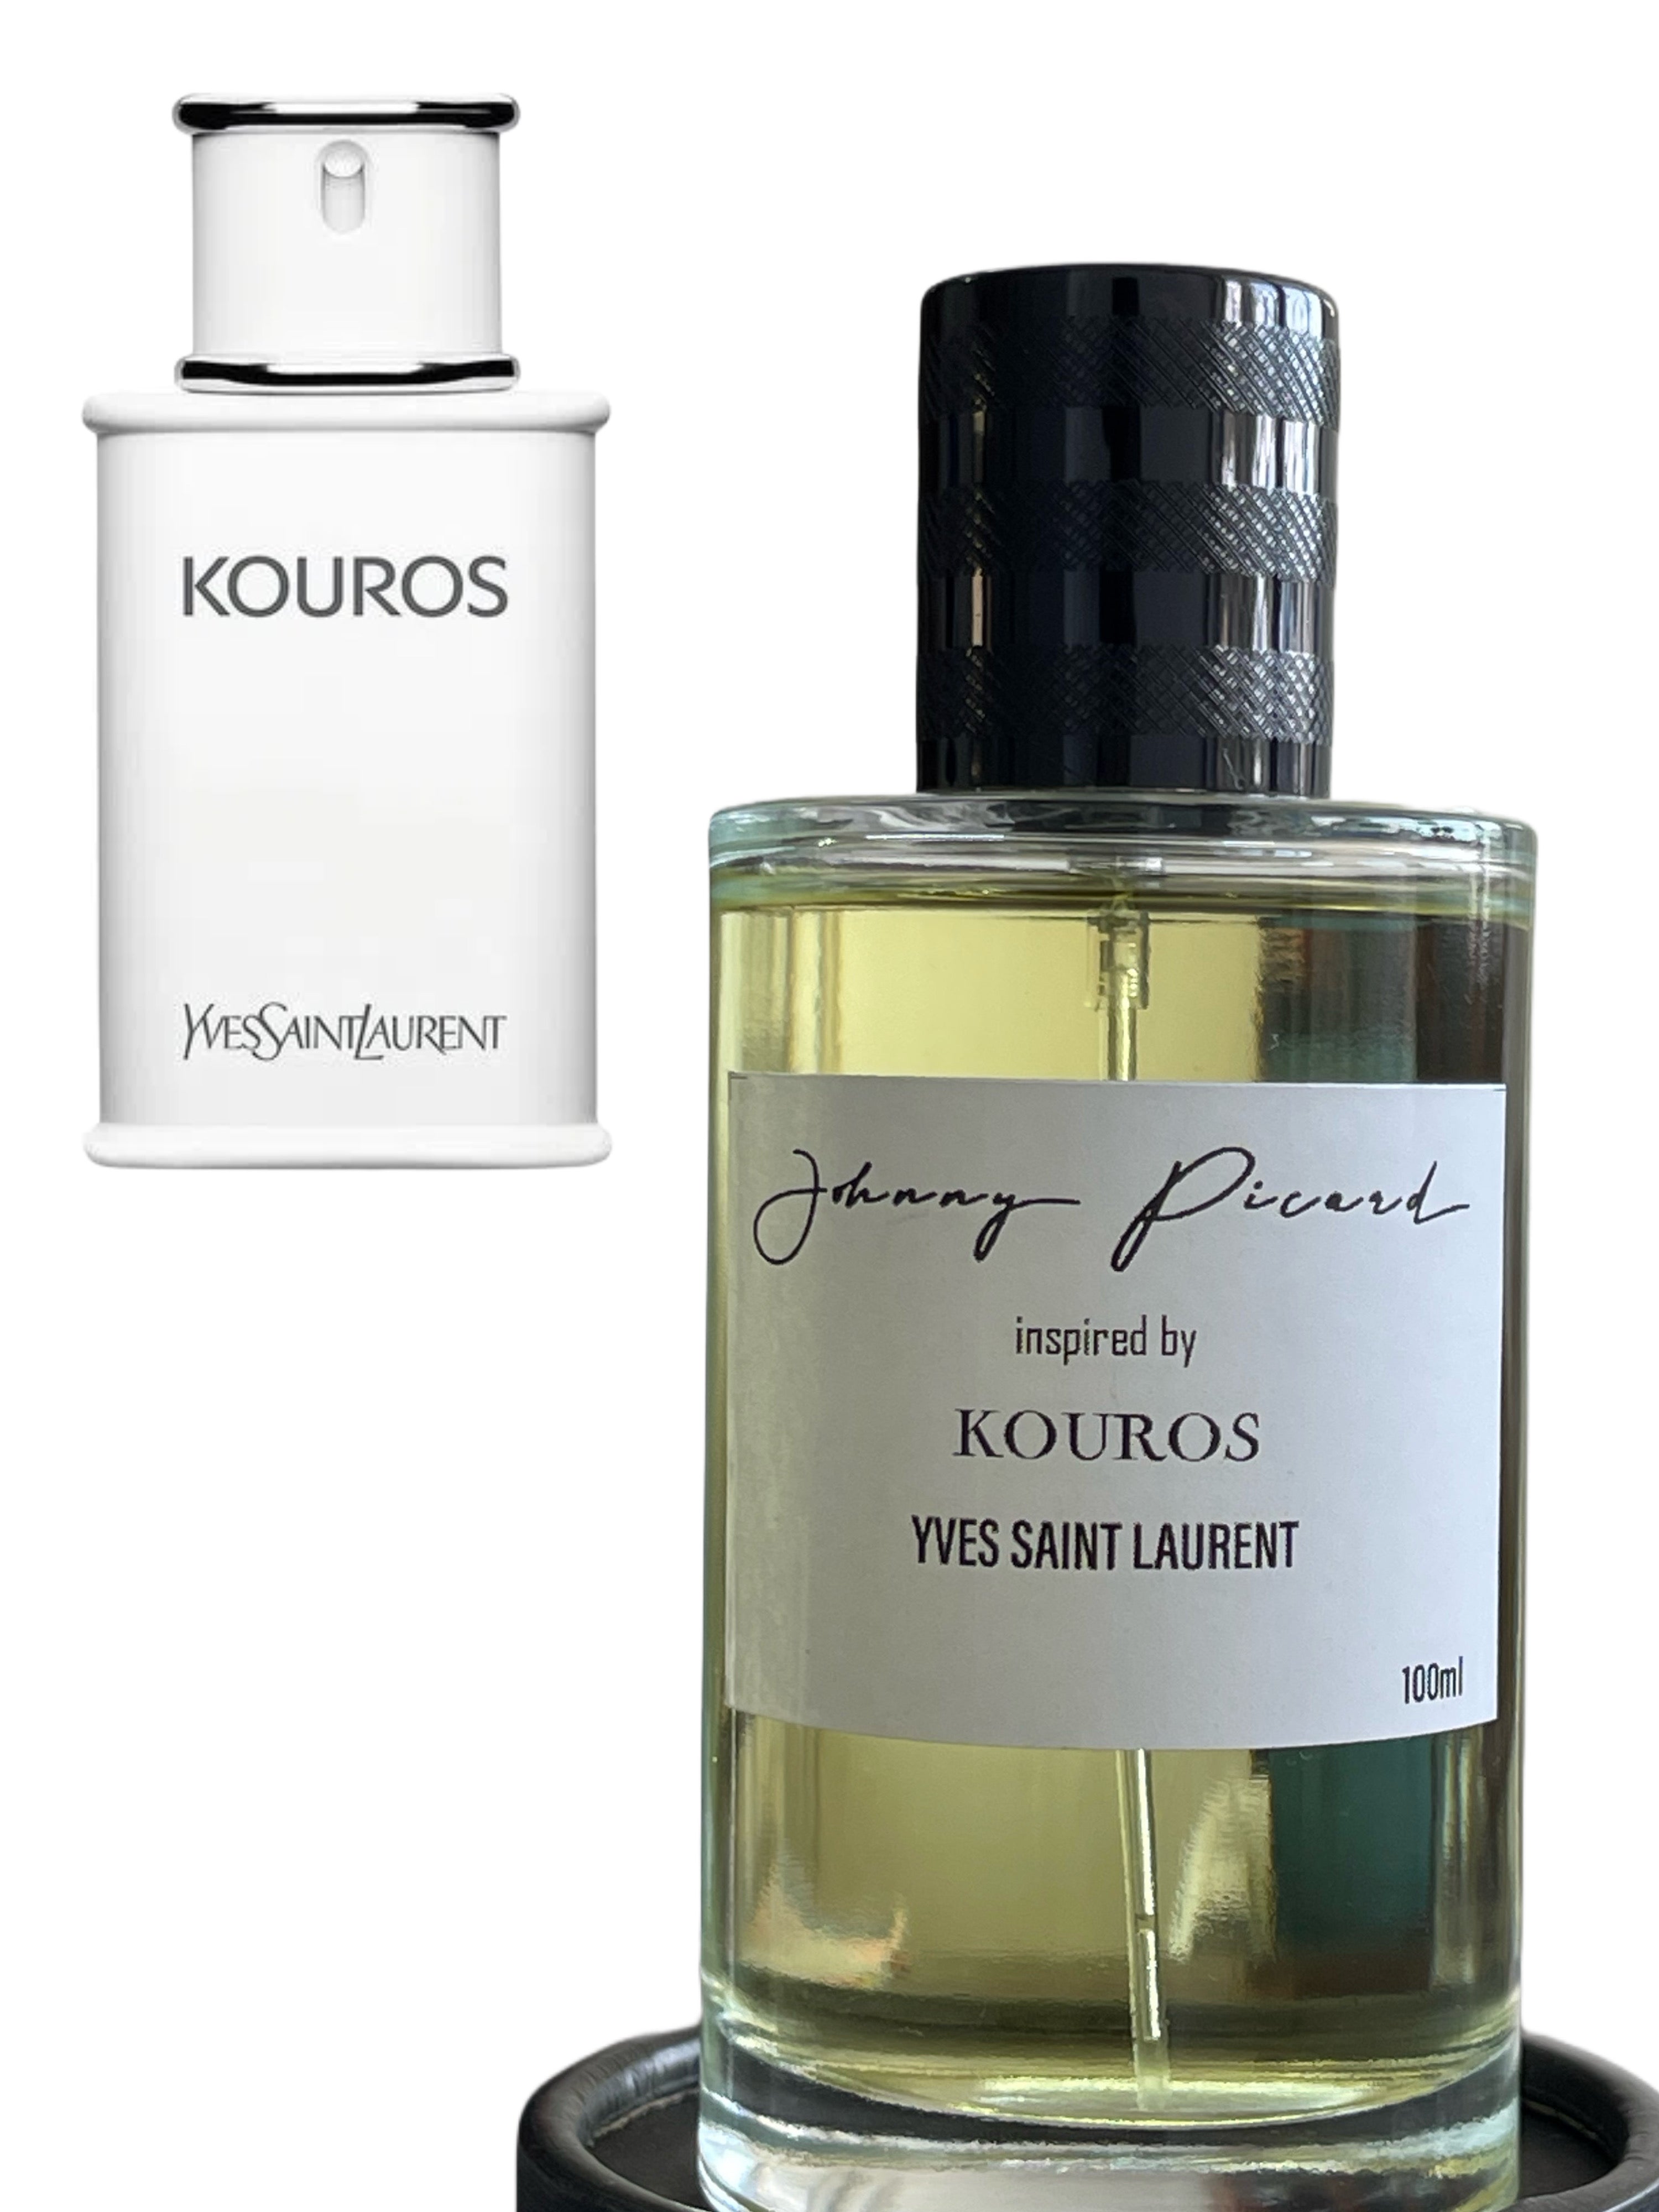 johnny picard inspired by kouros  YVES SAINT LAURENT